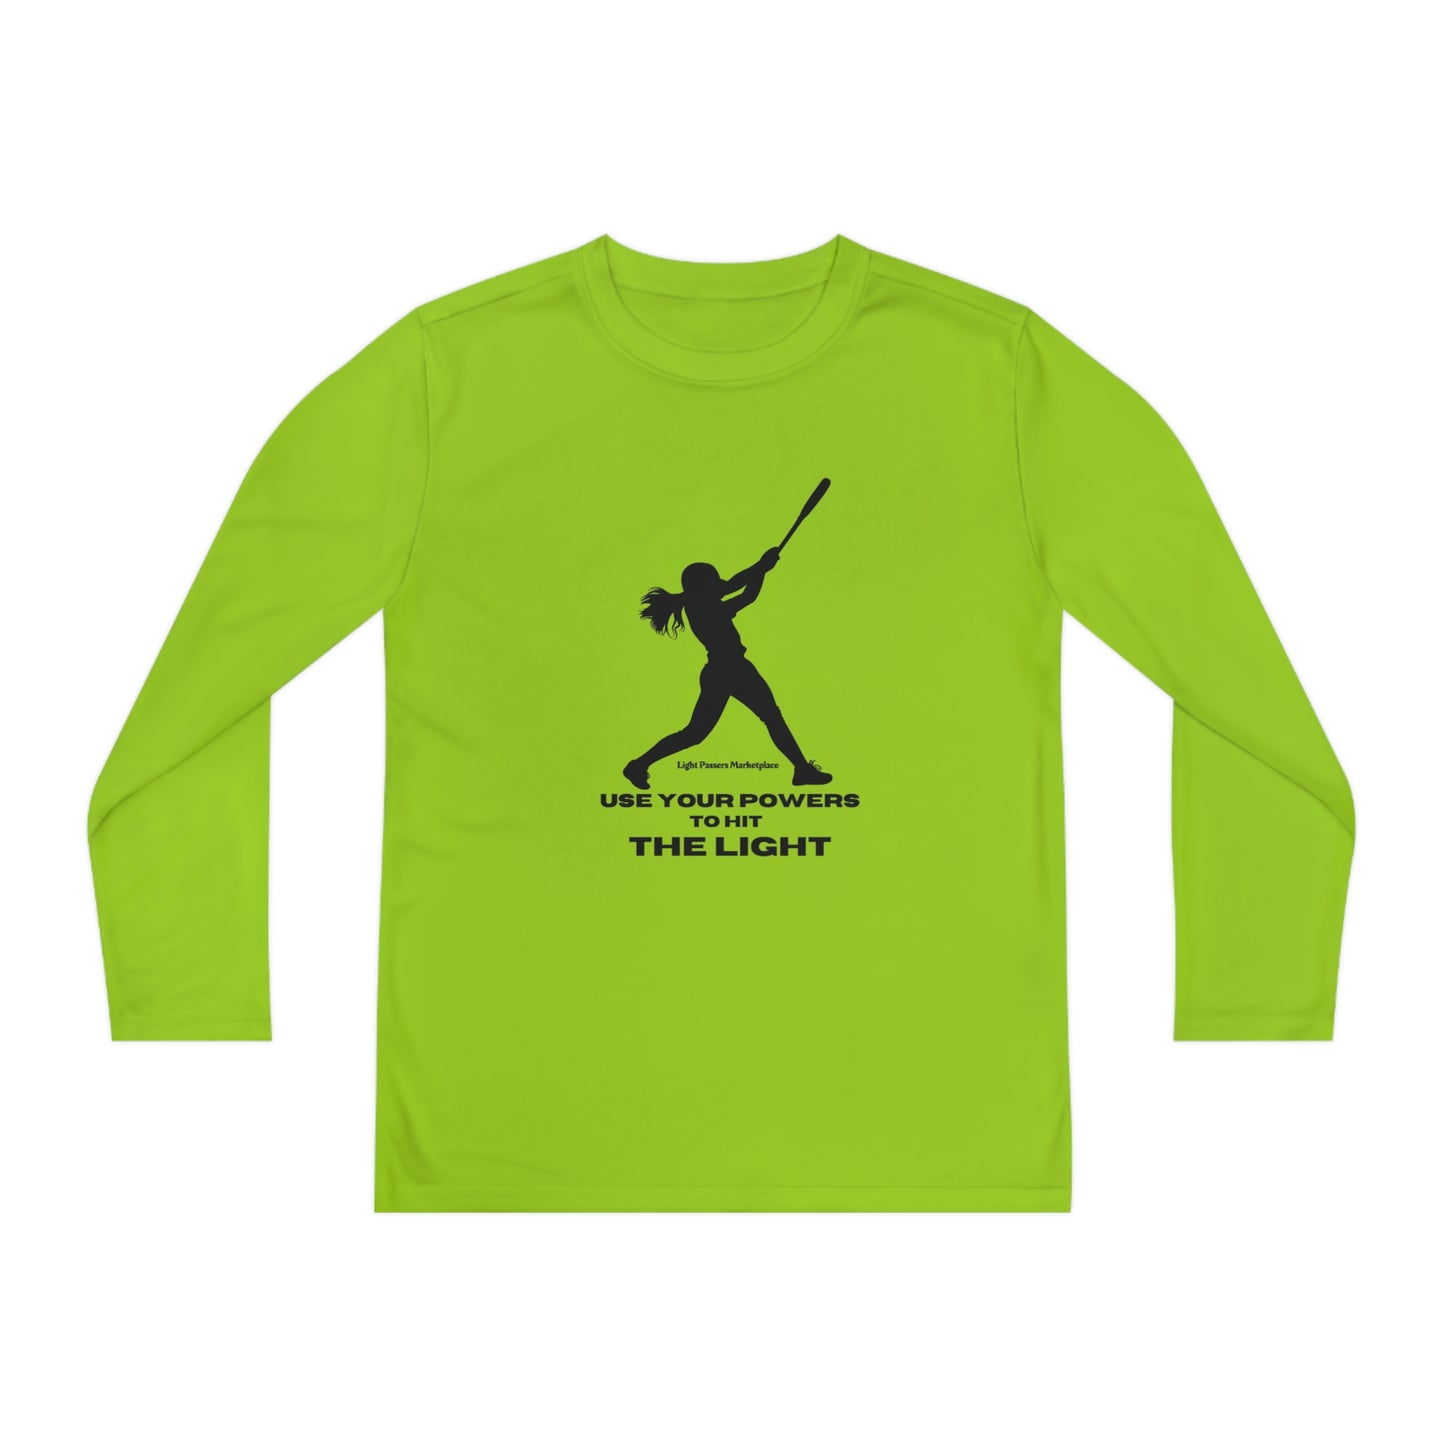 A green long-sleeved youth tee with a silhouette of a girl swinging a bat. Made of 100% moisture-wicking polyester, lightweight, and breathable for active kids.